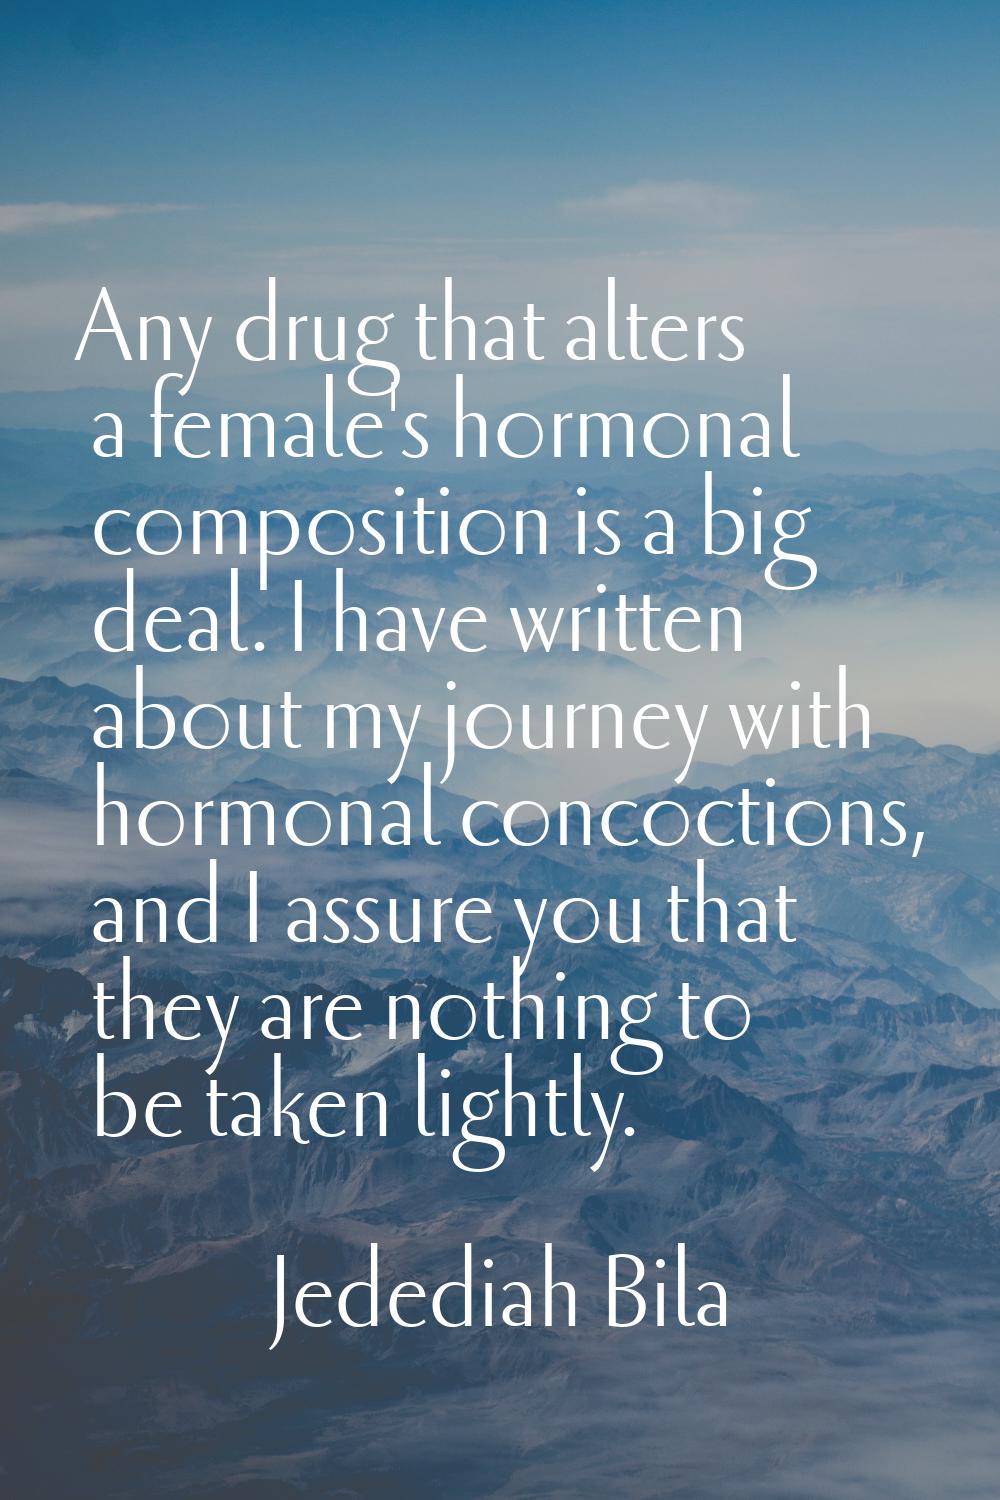 Any drug that alters a female's hormonal composition is a big deal. I have written about my journey